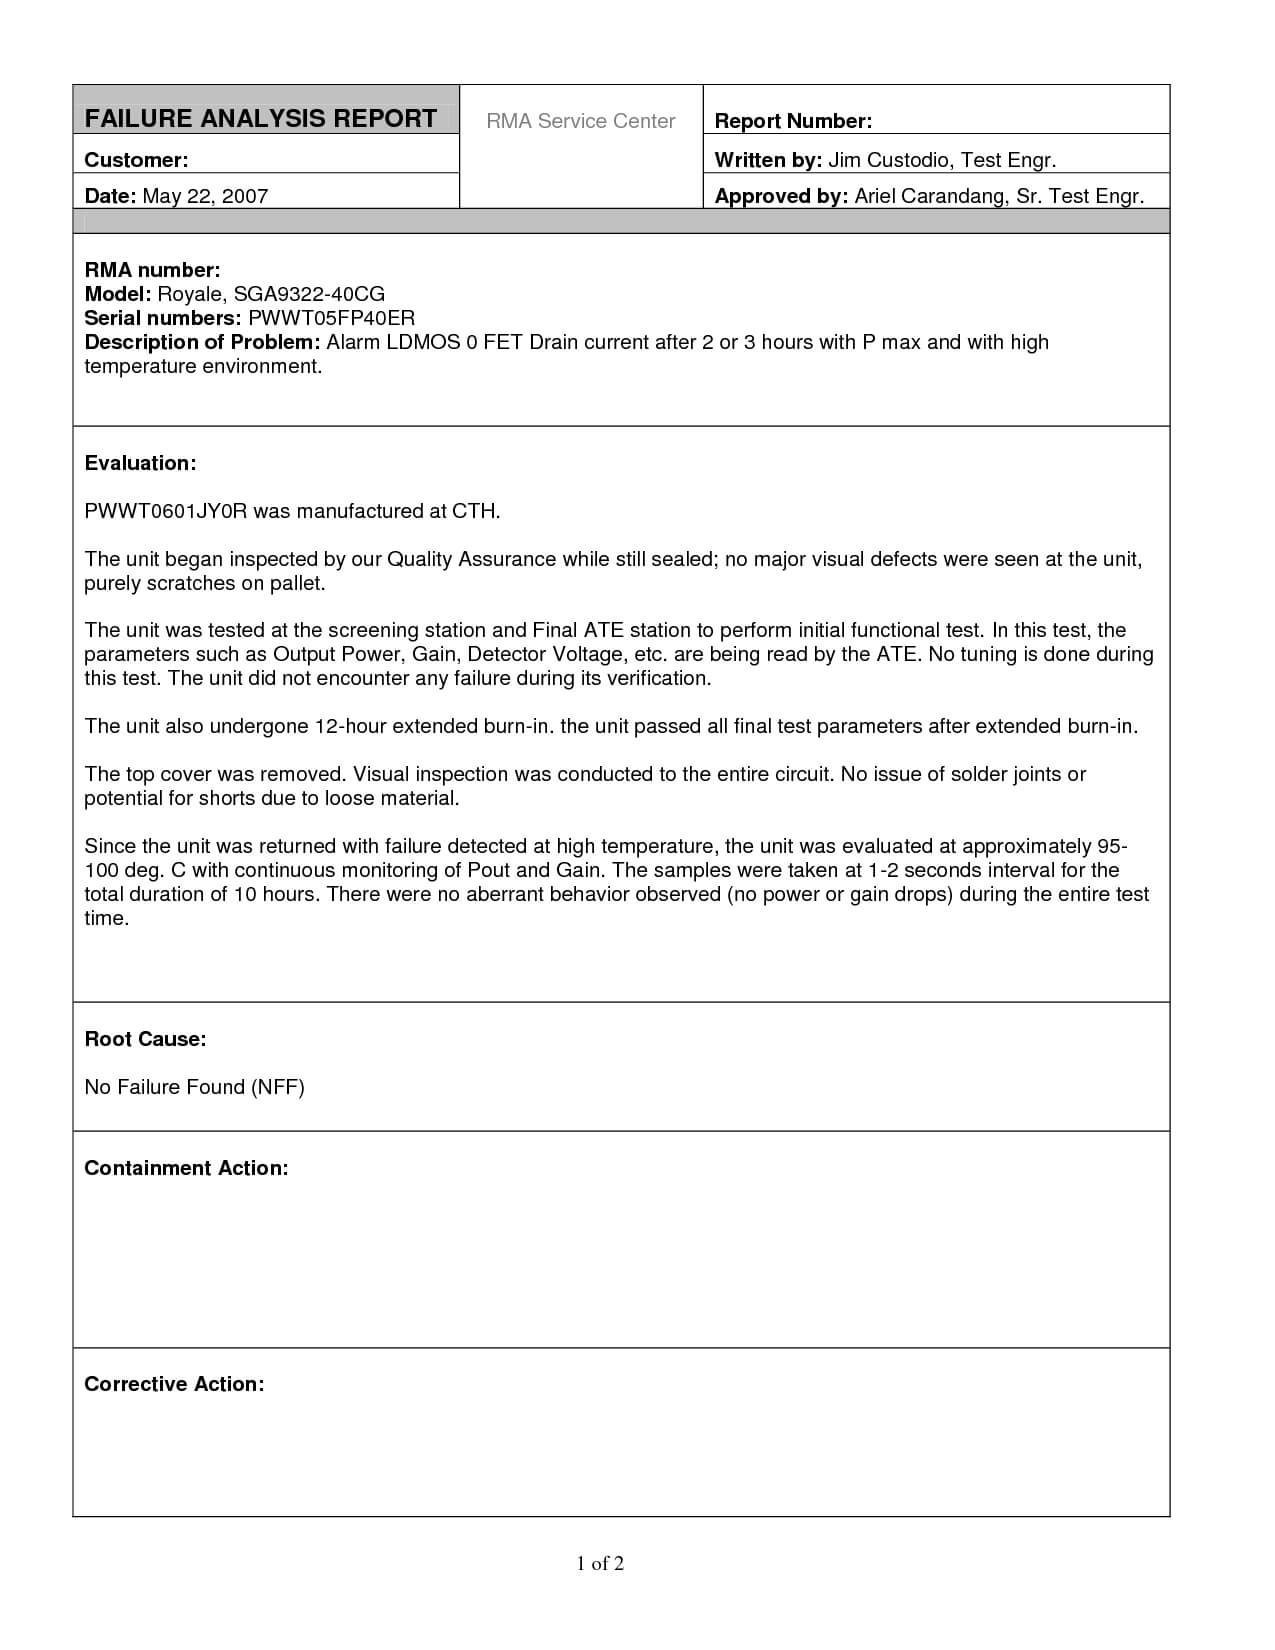 Excellent Failure Analysis Report Writtenjimcustodio34 Within Failure Analysis Report Template